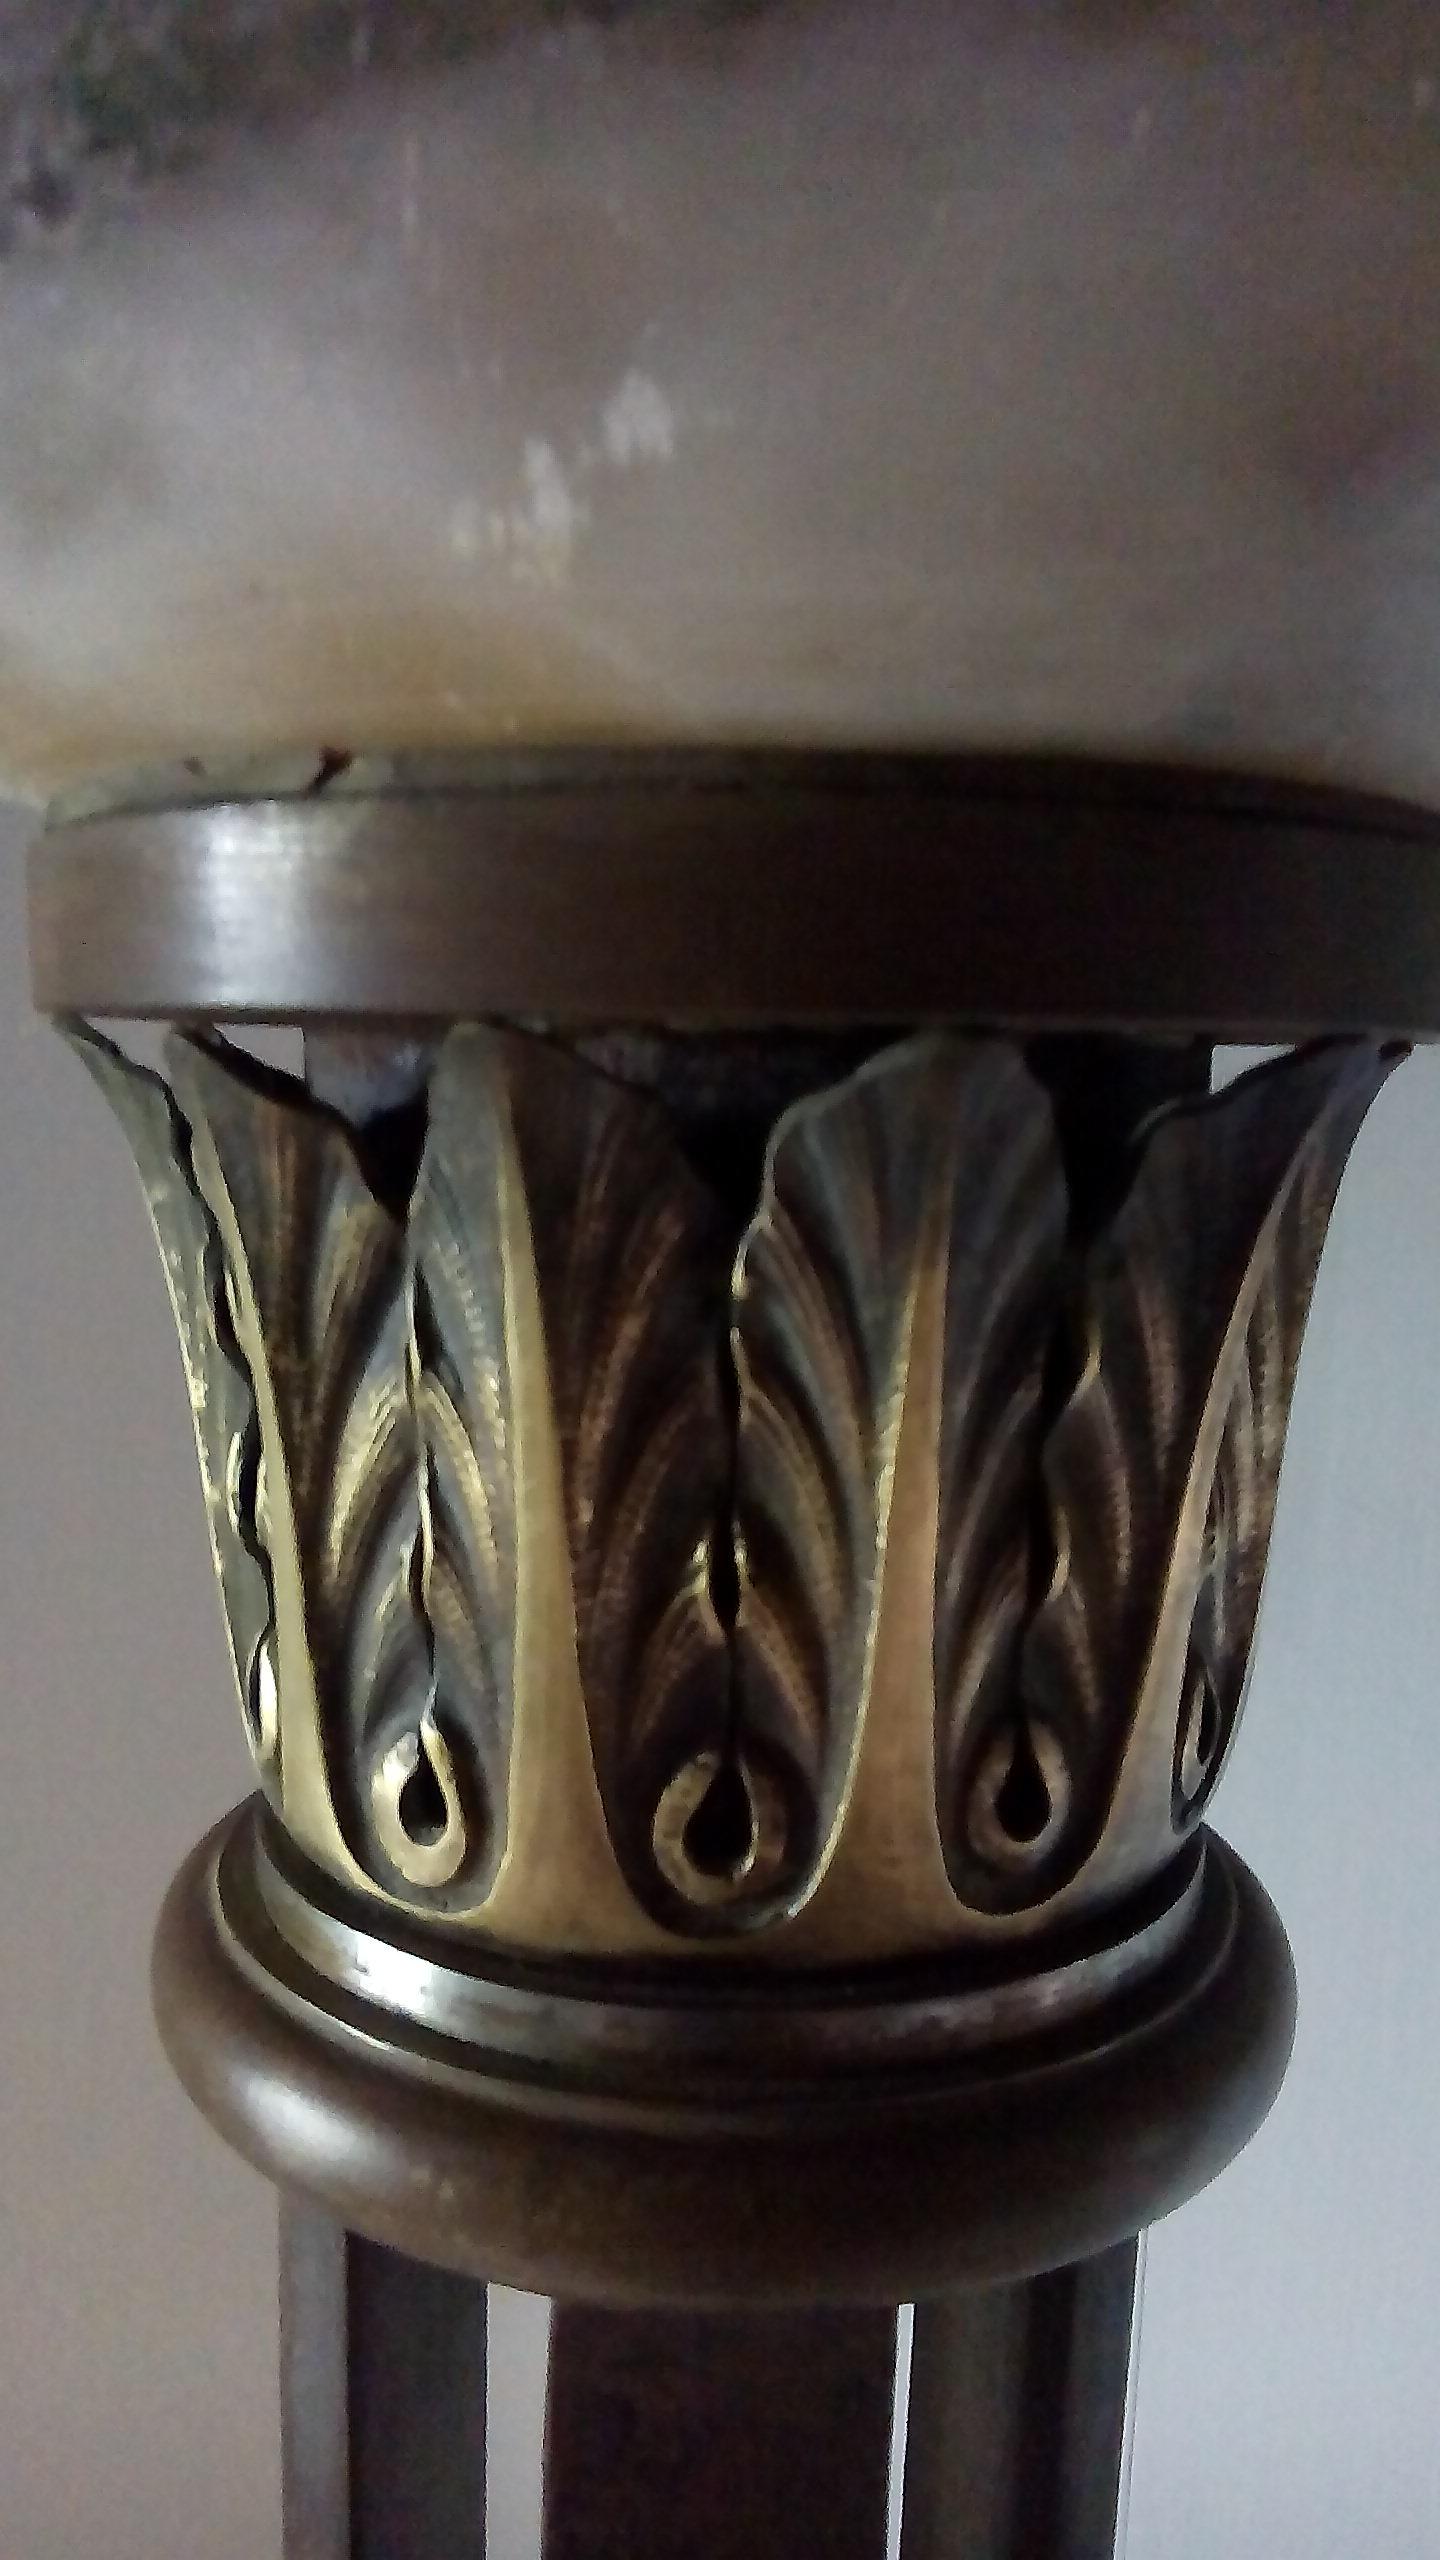 Pair of Art Deco torchere floor lamps, wrought iron structure decorated with acanthus leaves in chiseled bronze, light diffused through alabaster cup.
From a Parisian mansion, located 200 meters from the Arc de Triomphe.
Functional electrical